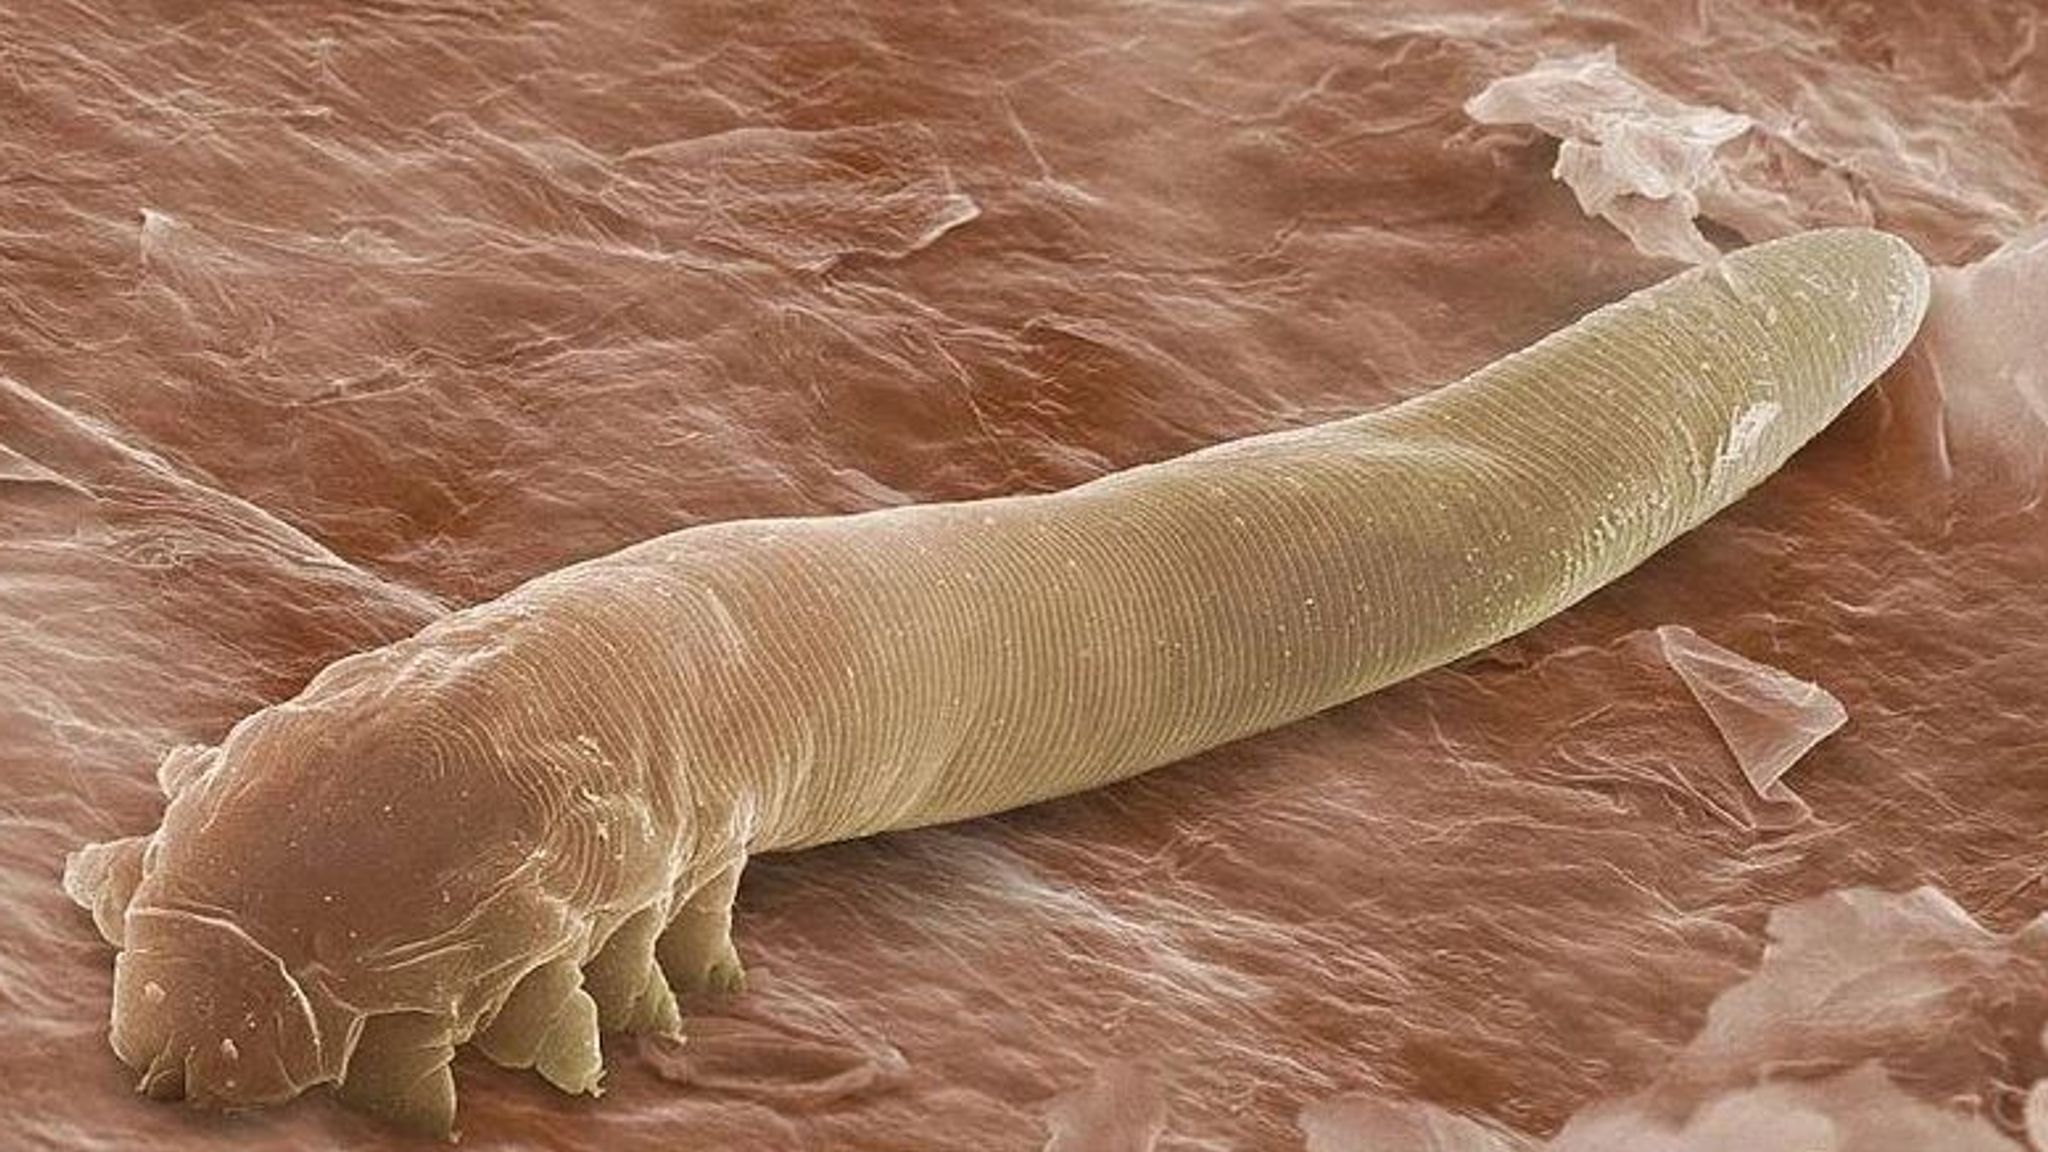 worm under microscope real